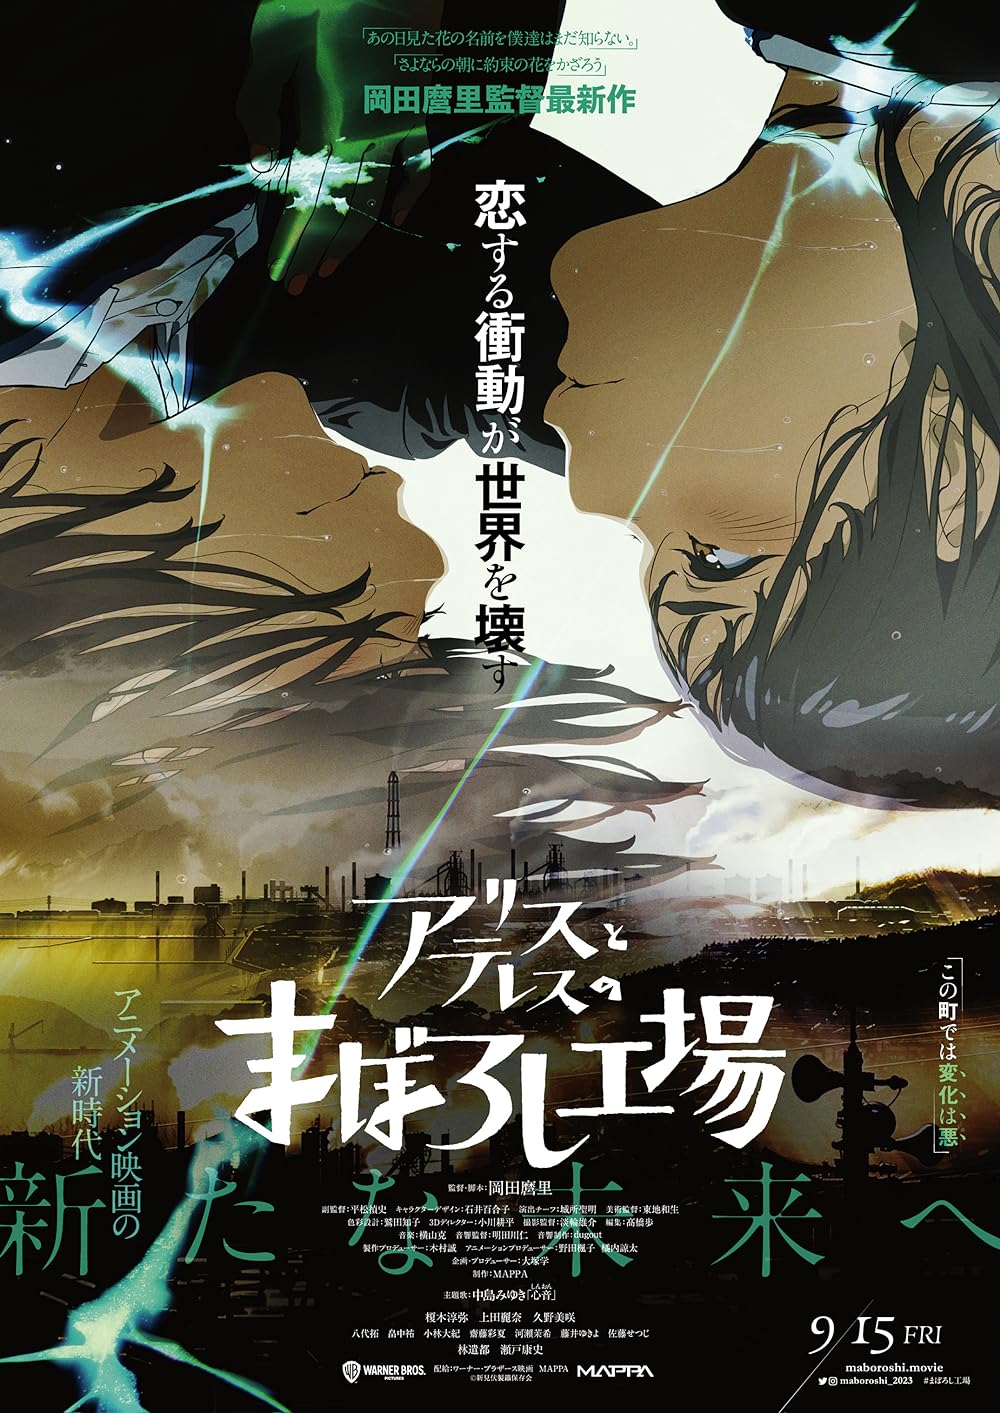 Maboroshi (January 15) - Streaming on NetflixDirected by Mari Okada, Maboroshi is a captivating anime film from Studio MAPPA. The story unfolds in a town frozen in time due to a mysterious industrial accident. In this static world, 14-year-old Masamune grapples with depression. His encounter with two girls, the enigmatic Mutsumi and the wild, mute Itsumi, challenges the town’s strict rule against change, potentially altering their world’s balance.